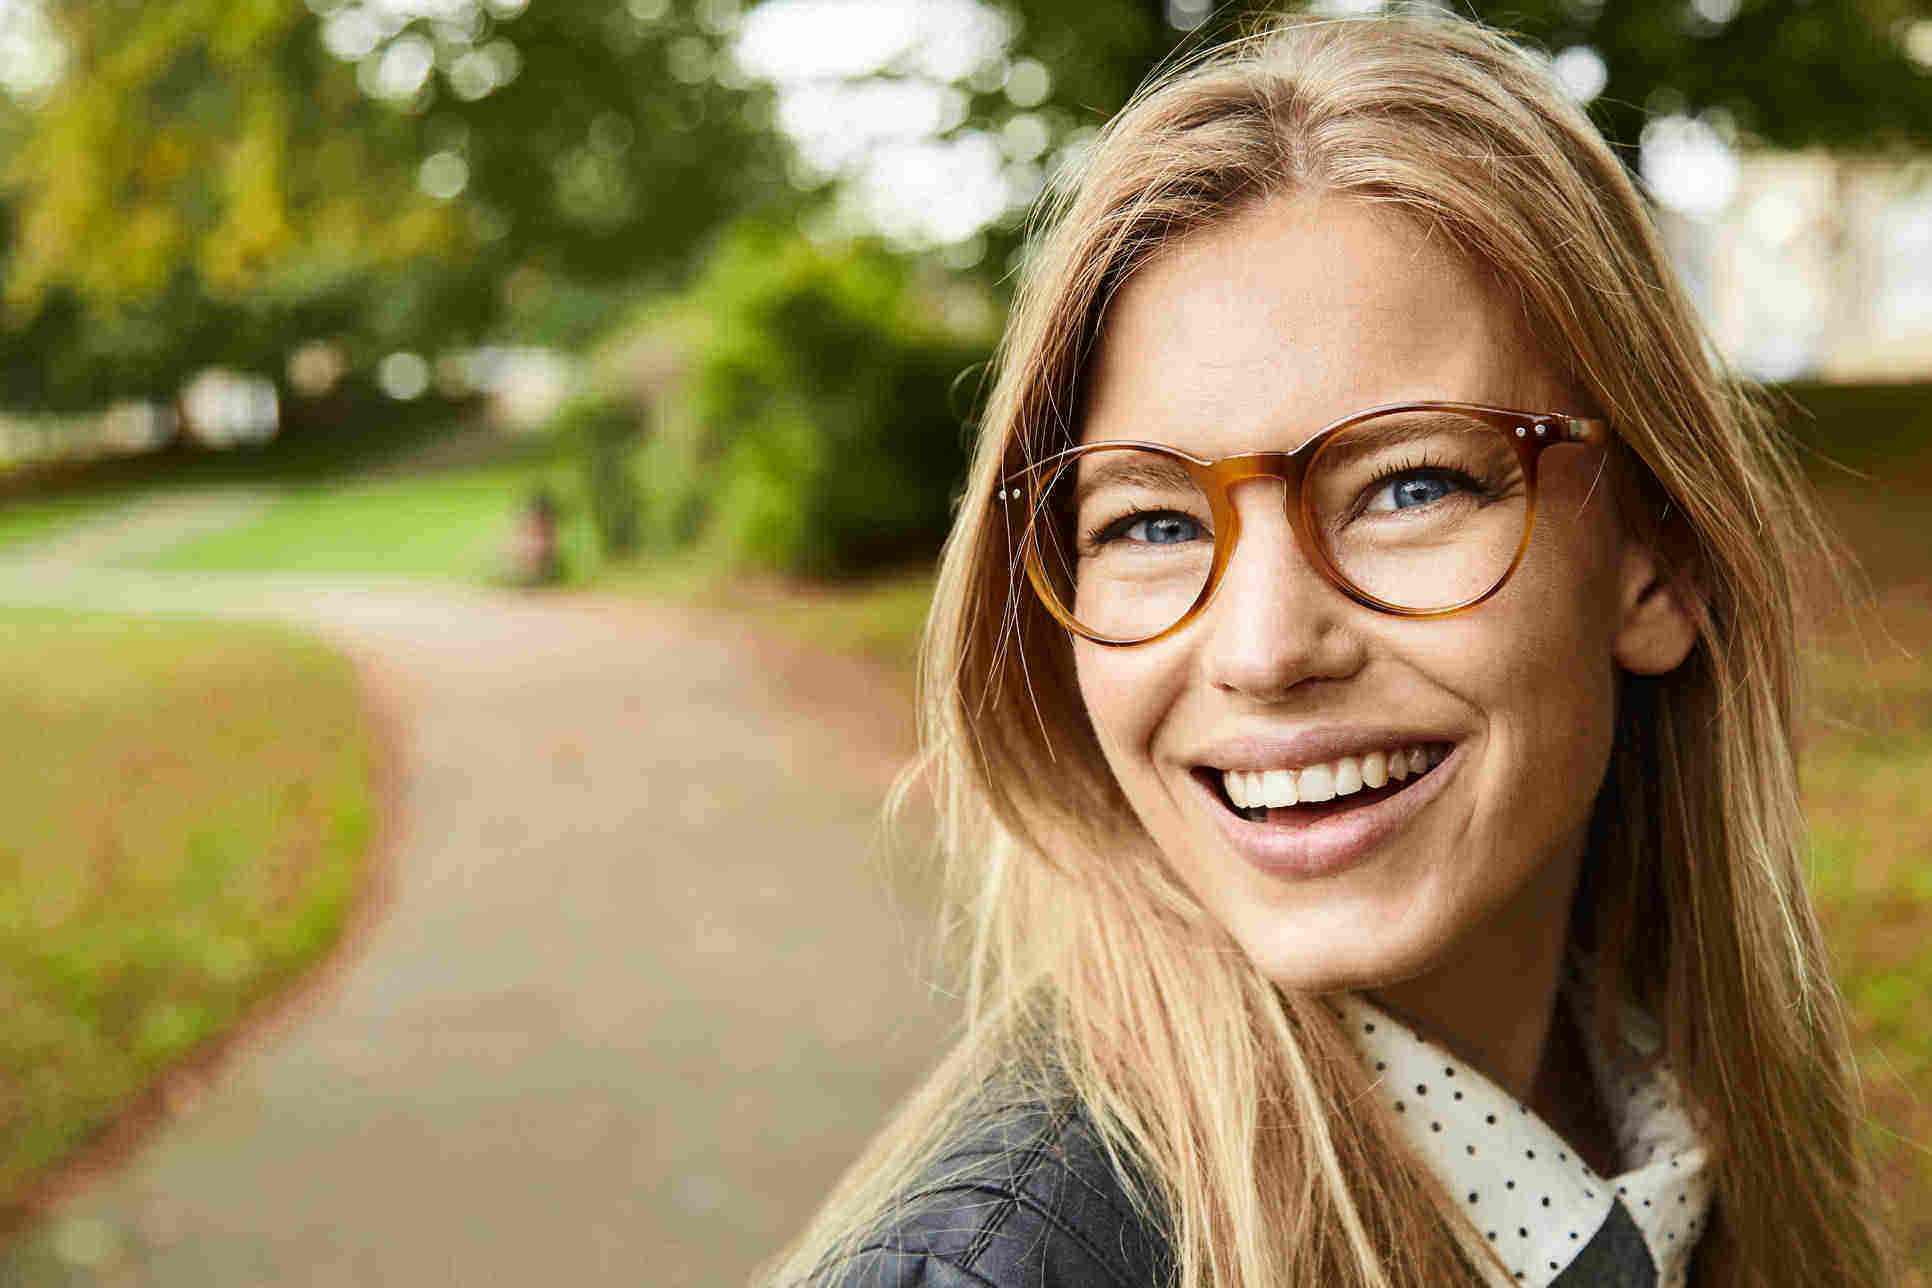 Glasses Could Be the ‘Medicine’ You Need